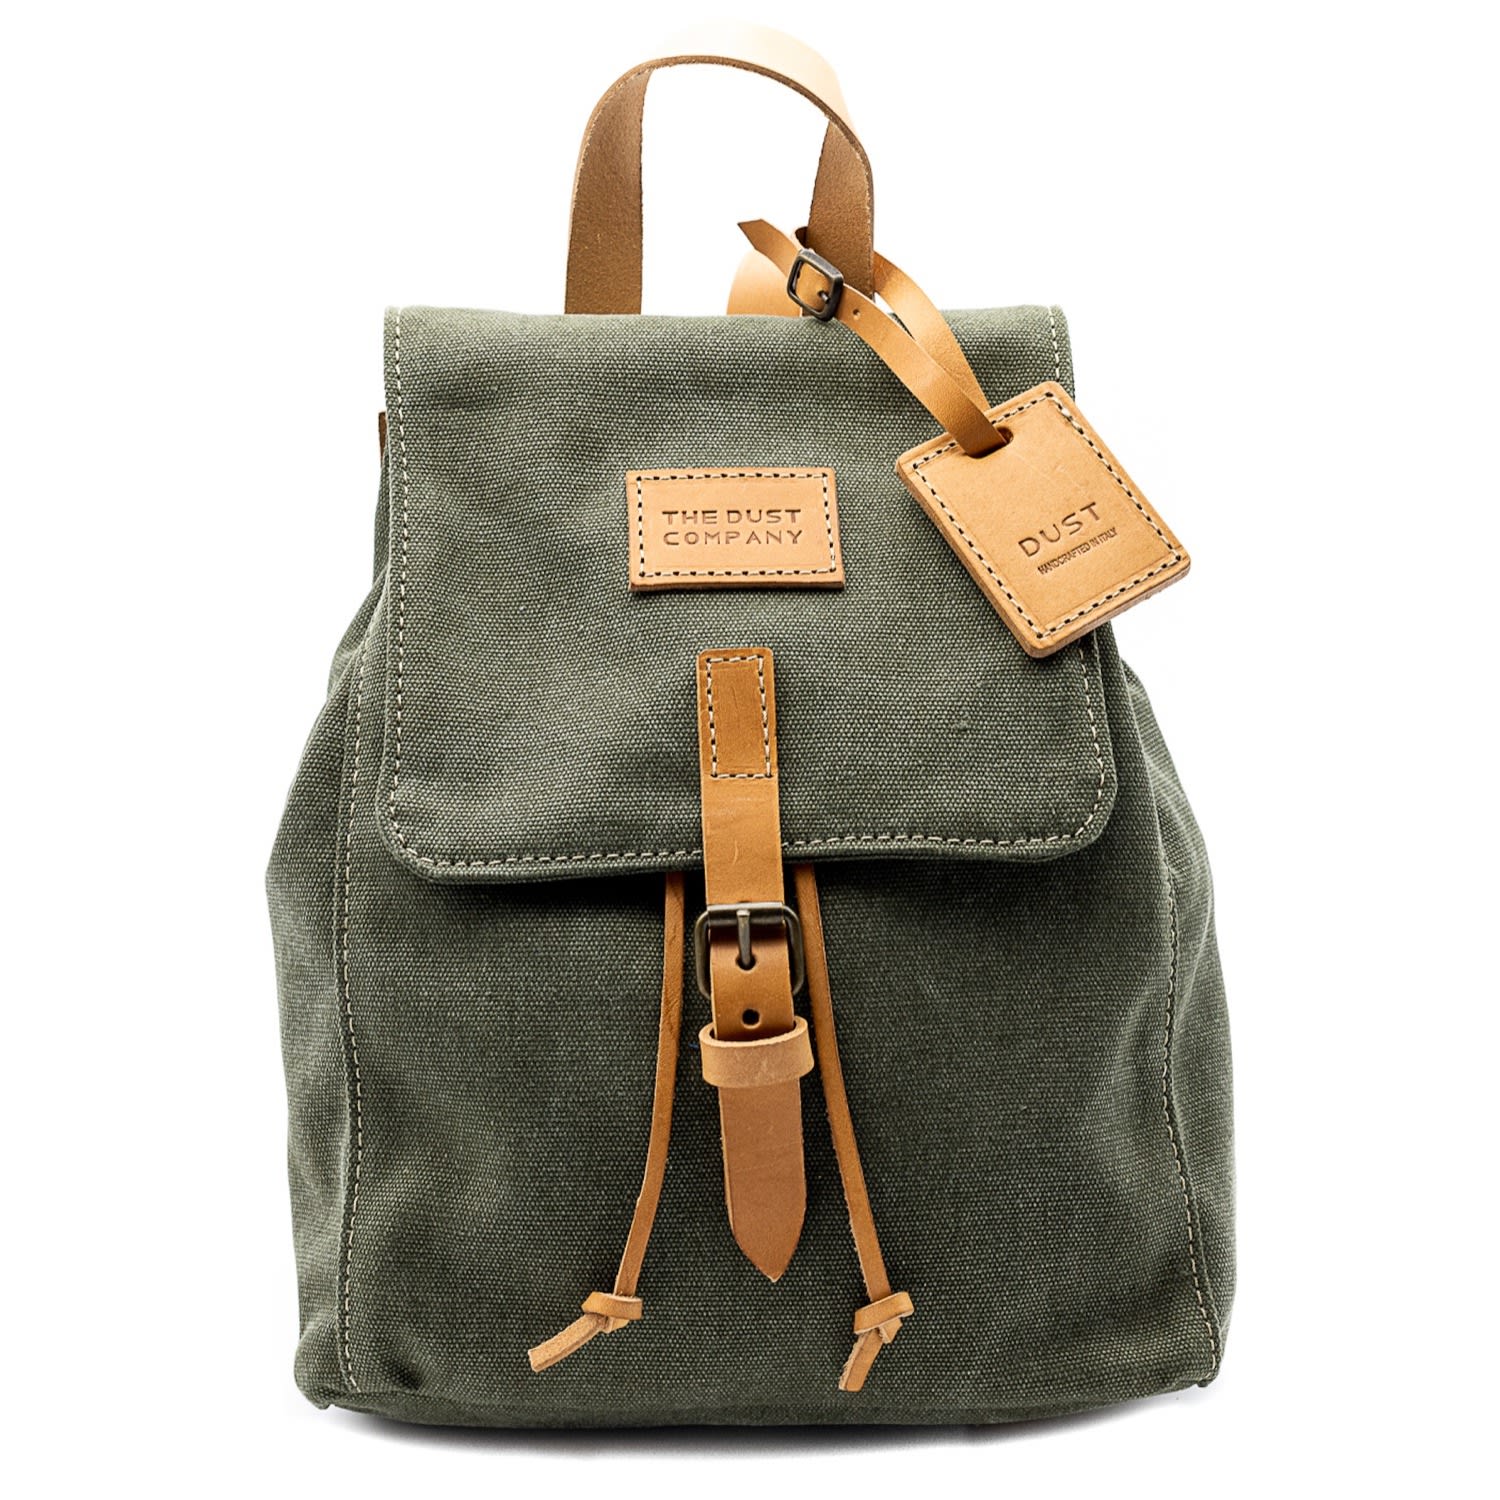 The Dust Company Women's Backpack In Cotton Green & Cuoio